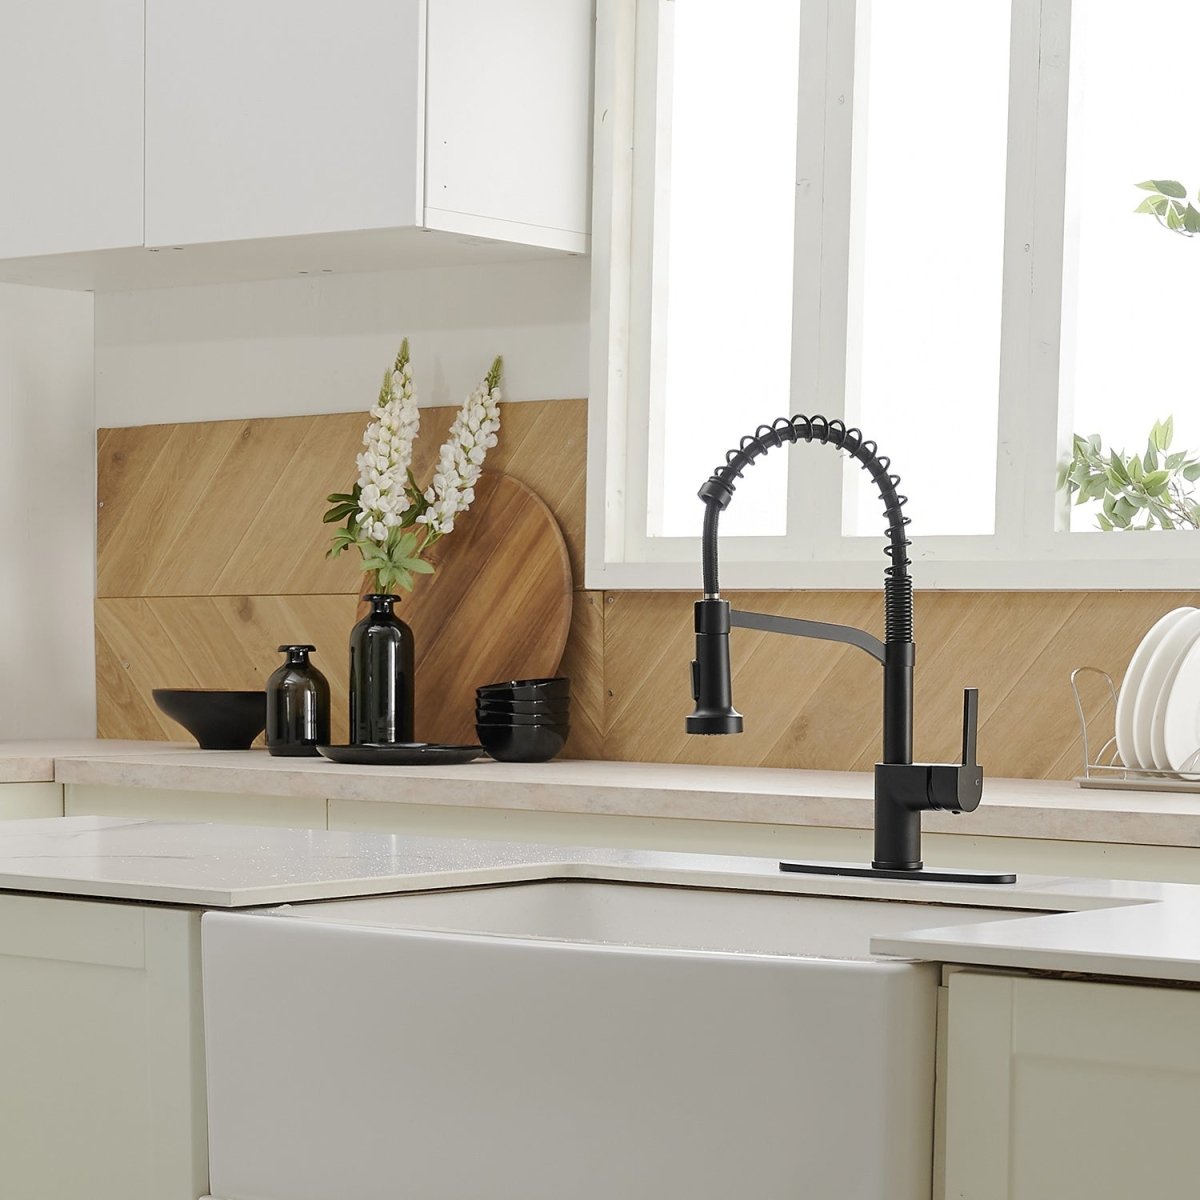 Single Handle Pull Down Kitchen Faucet with Deck Plate Black - buyfaucet.com